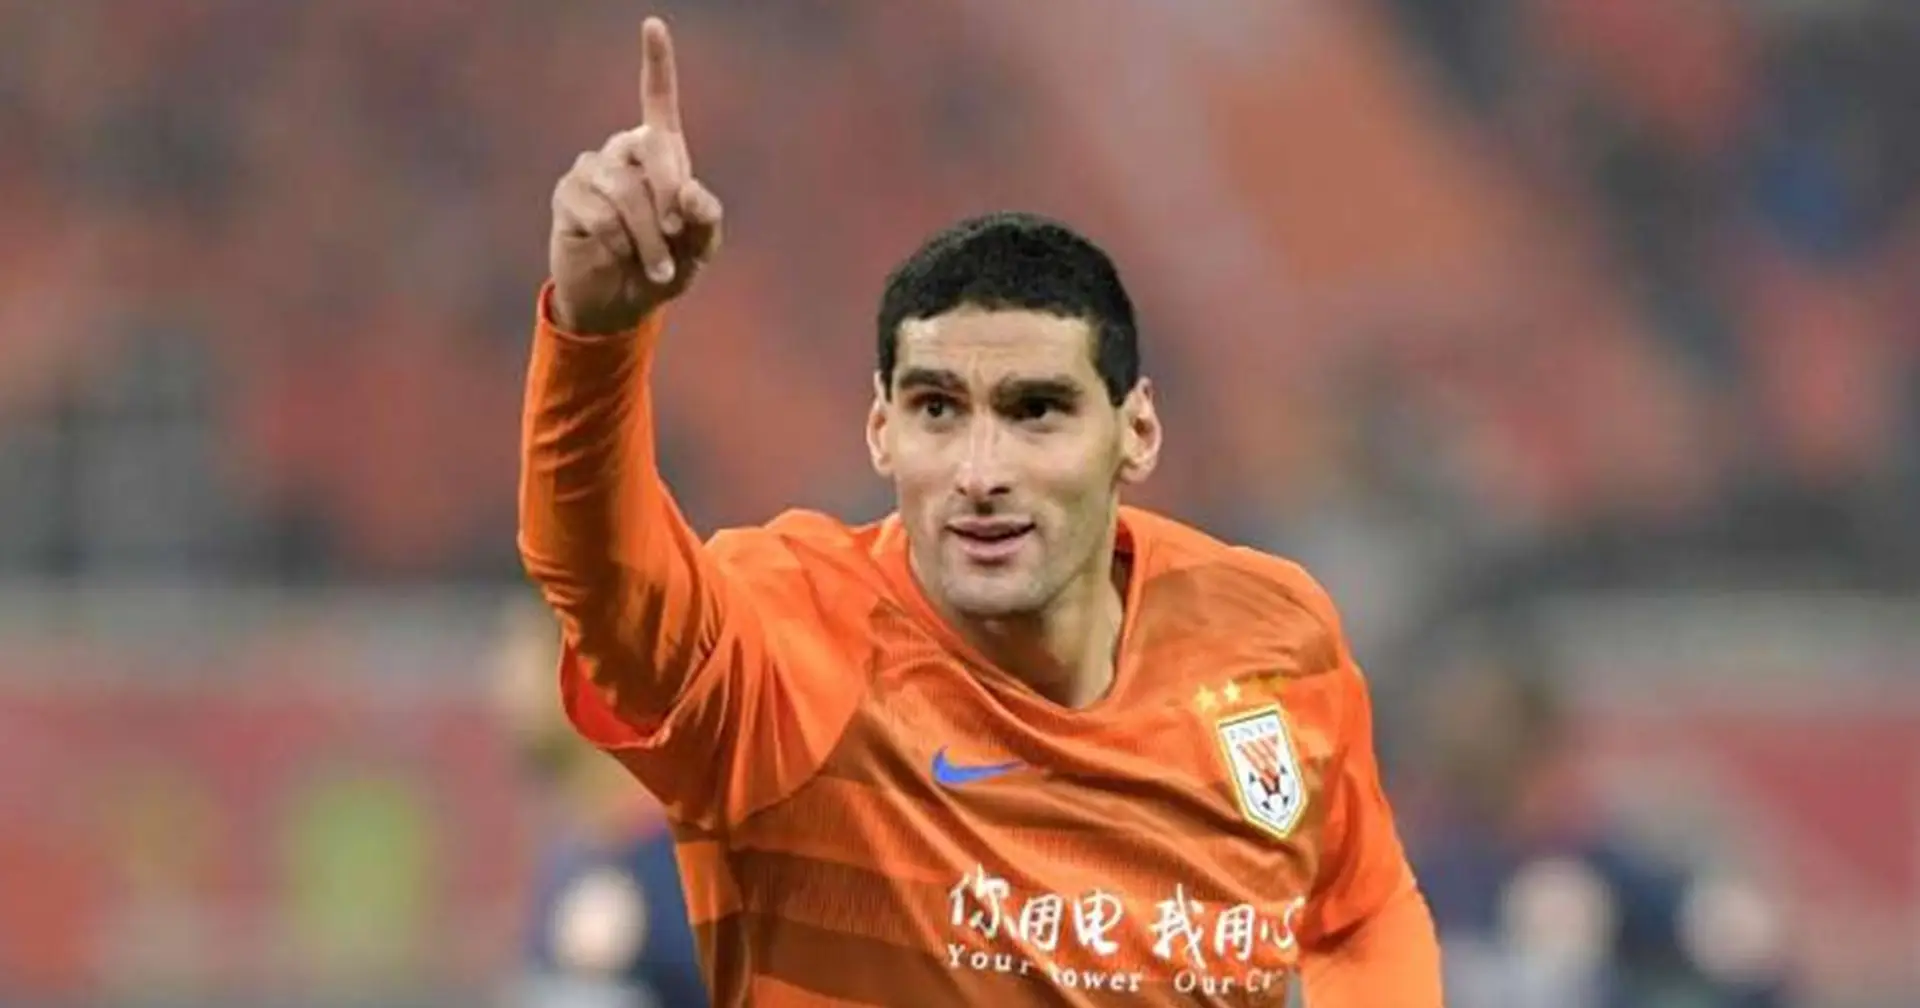 Marouane Fellaini scores 7-minute hat-trick to inspire Shandong Luneng comeback win in Chinese Super League clash